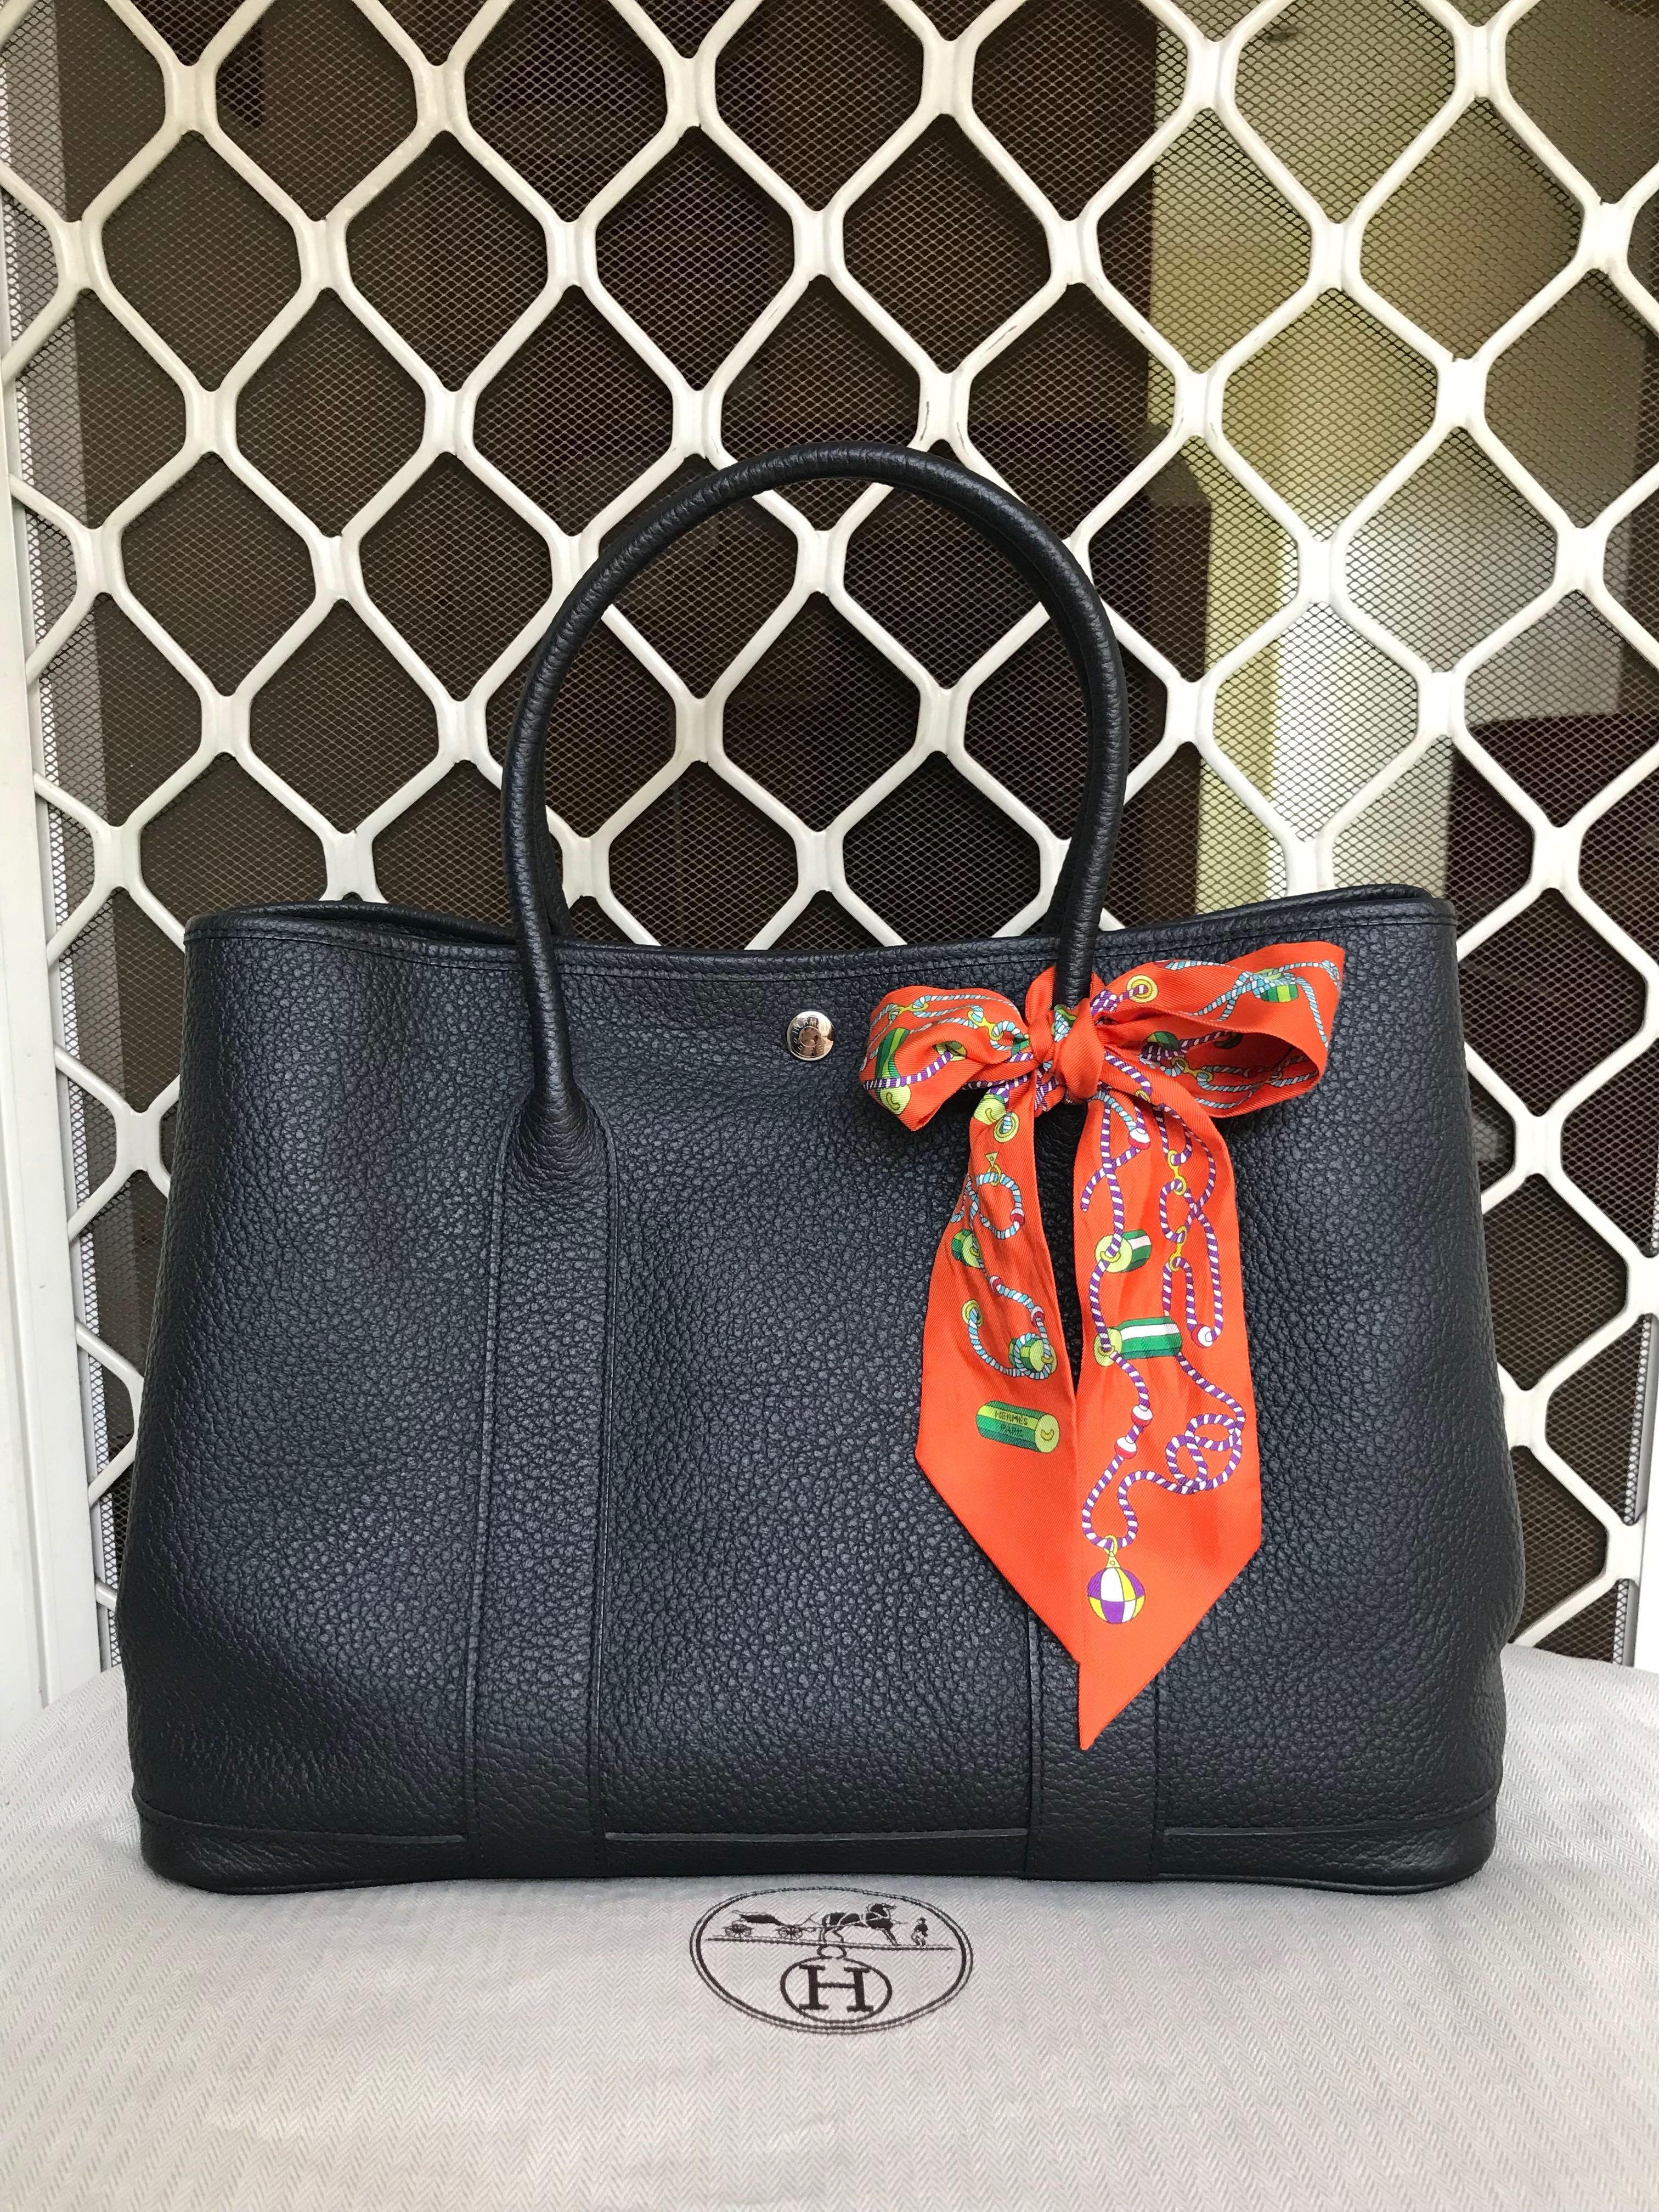 Hermes Garden Party Tote ia And Leather 36 Brown